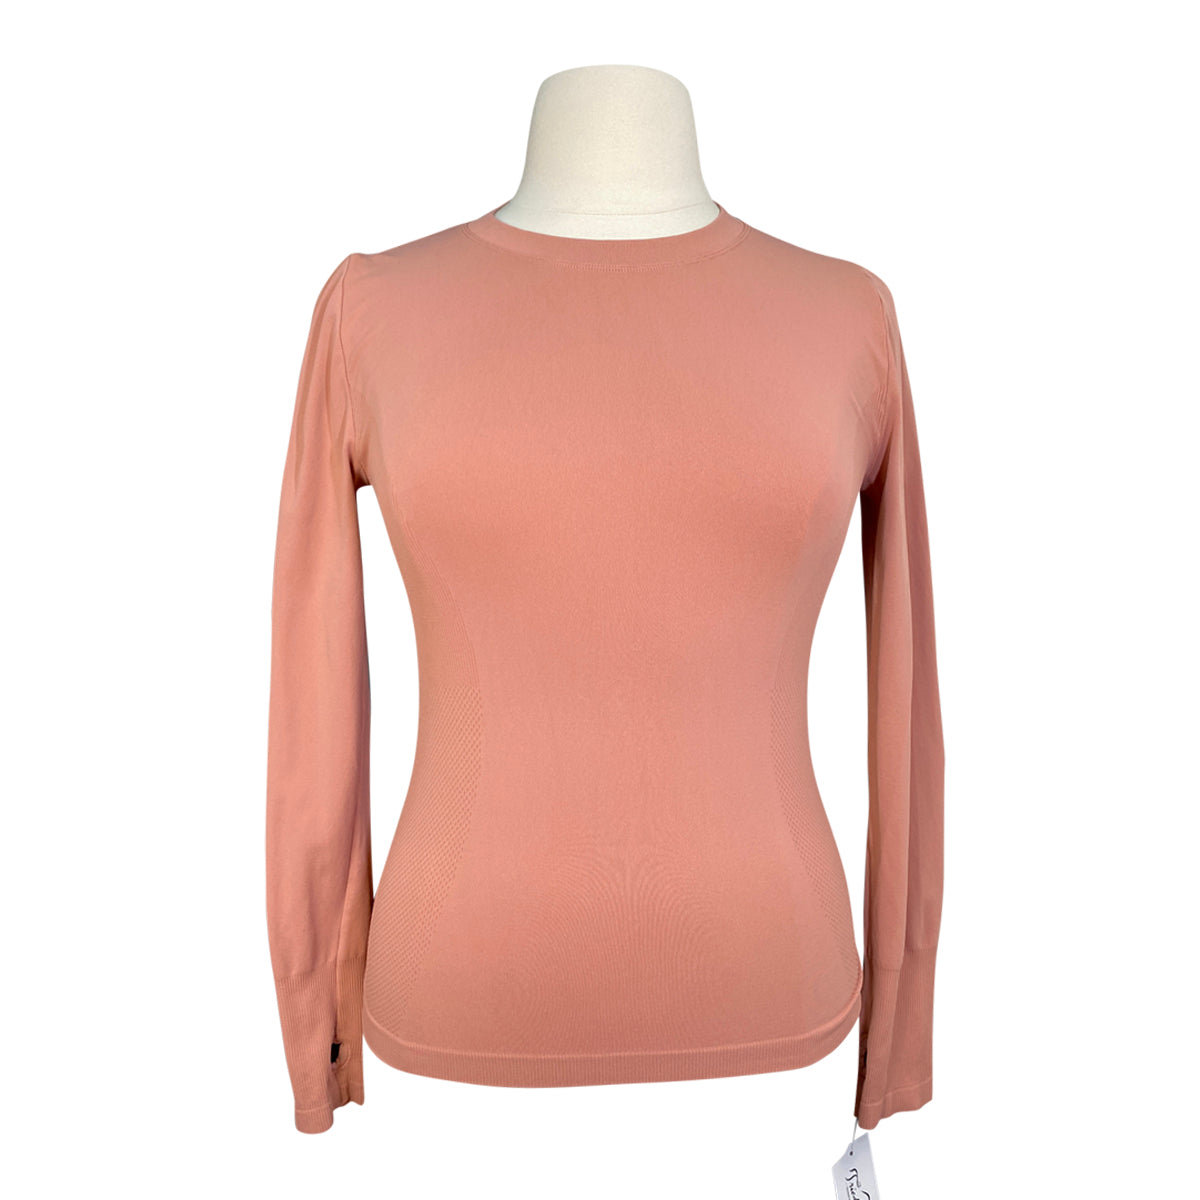 TKEQ Long Sleeve Compression Shirt in Dusty Rose